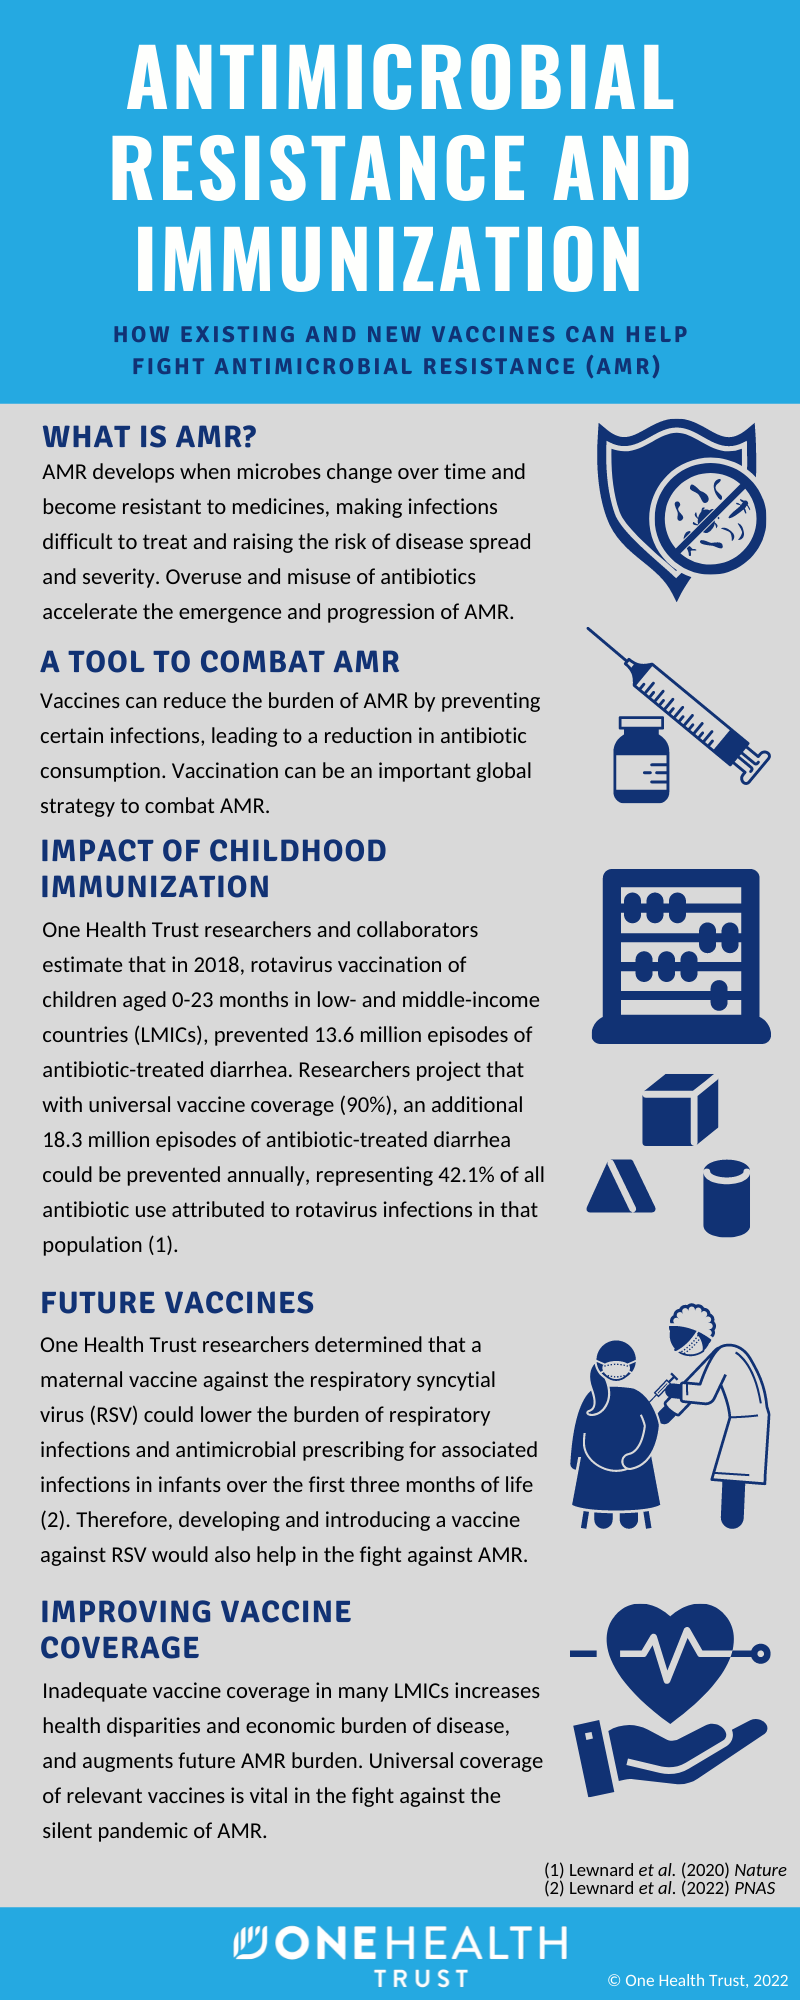 Infographic showing the relationship between AMR and Immunization, and how existing and new vaccines can help fight antimicrobial resistance.